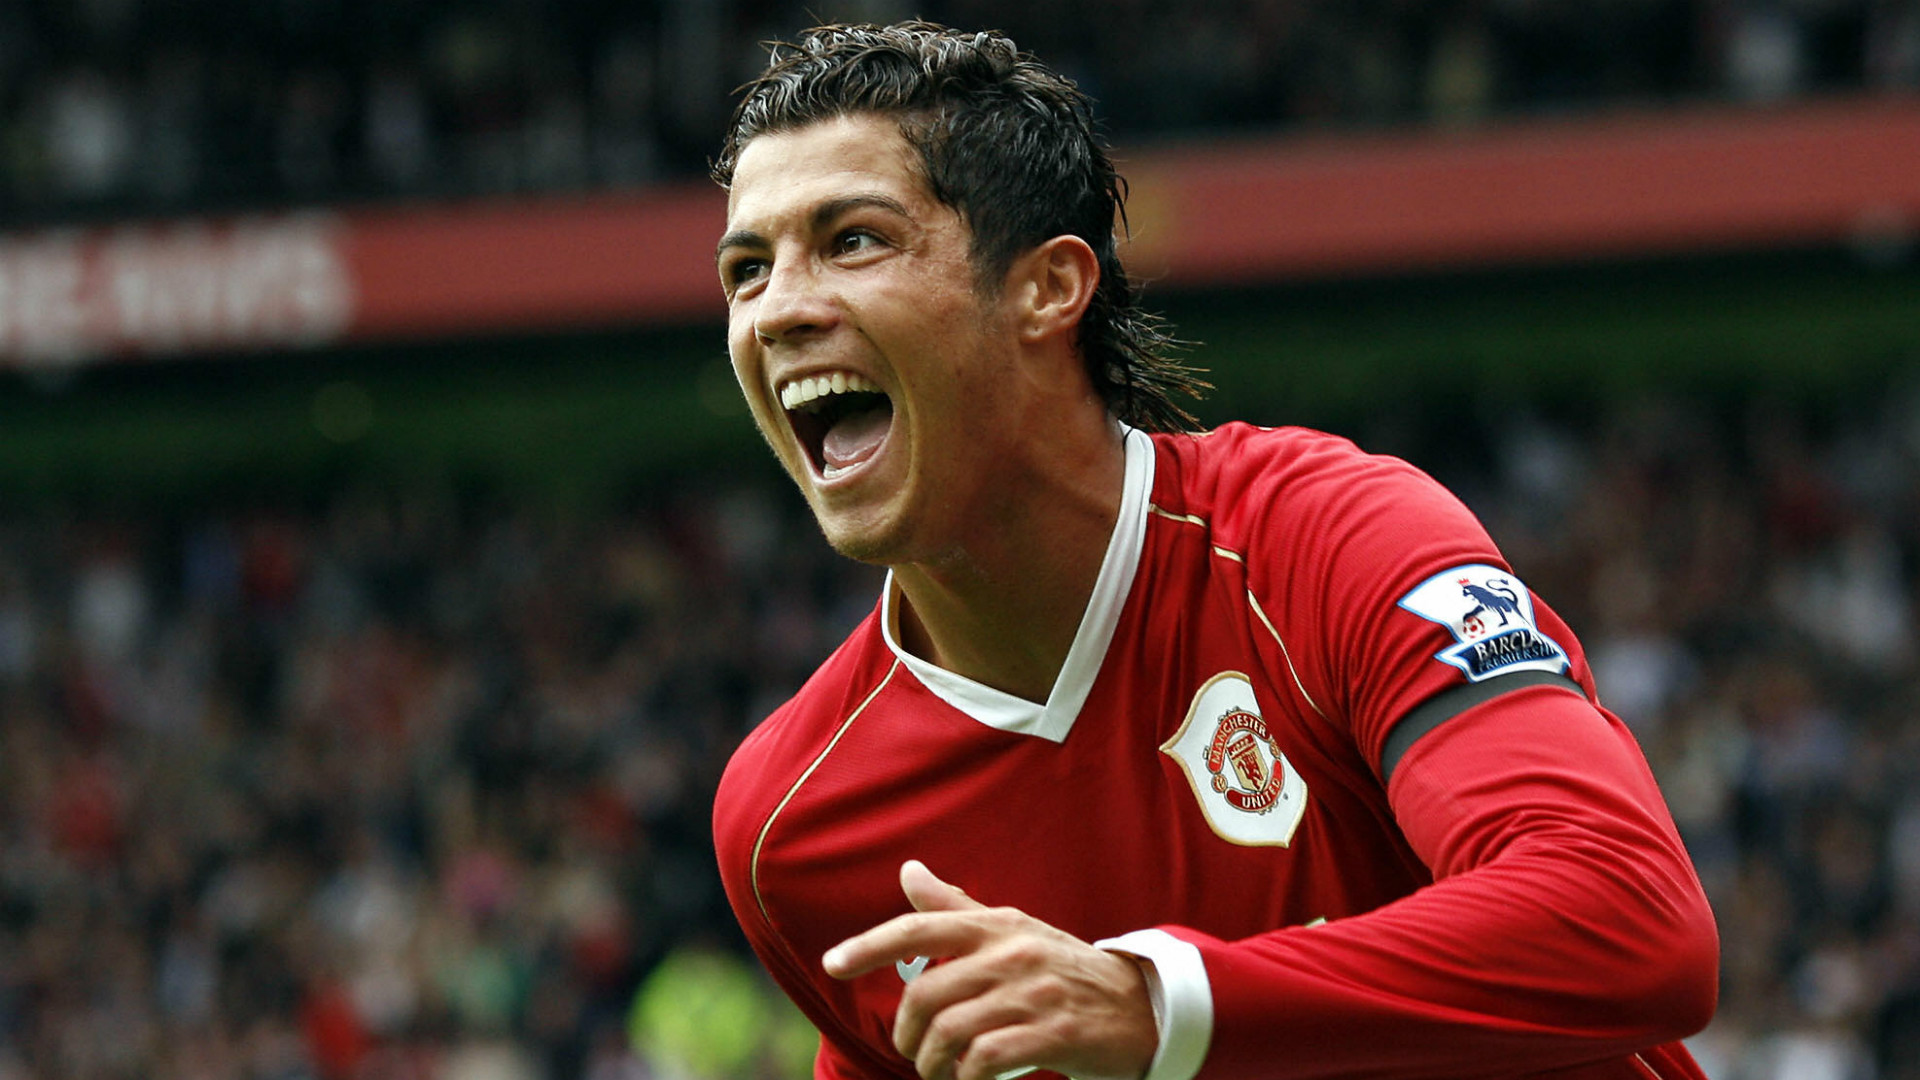 Diego Forlan claims Cristiano Ronaldo 'spent all day looking in the mirror' at Manchester United - Bóng Đá